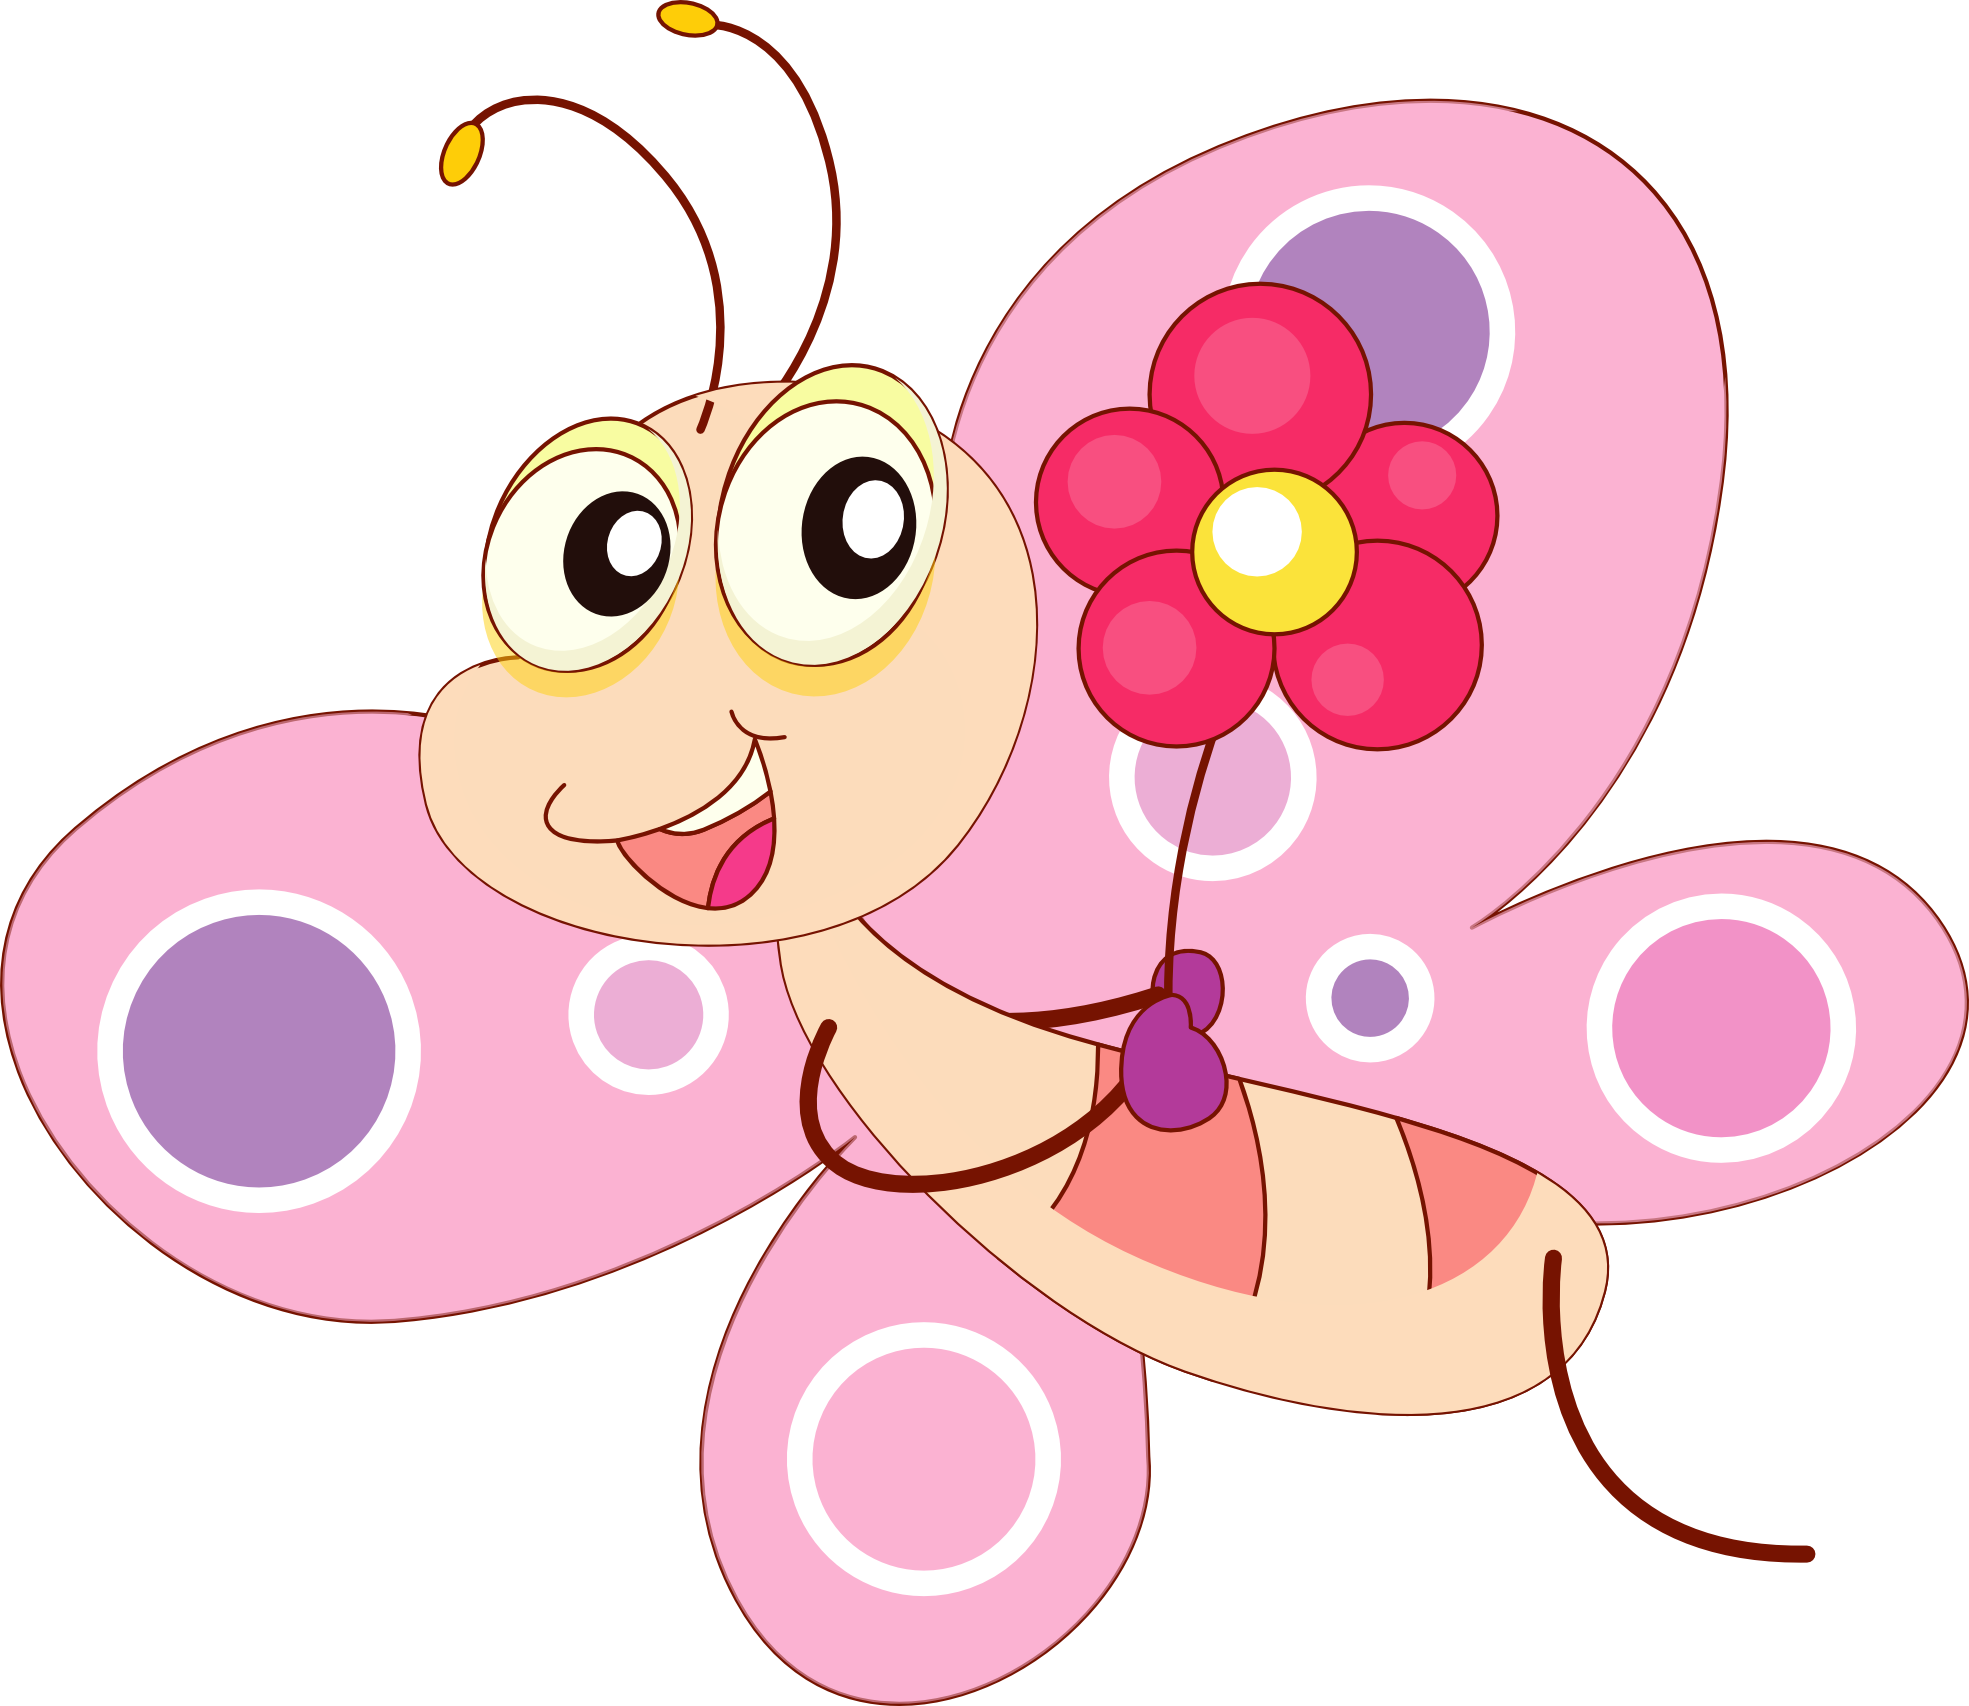 Butterfly Cartoon Png Image #31563 - Cartoon, Transparent background PNG HD thumbnail